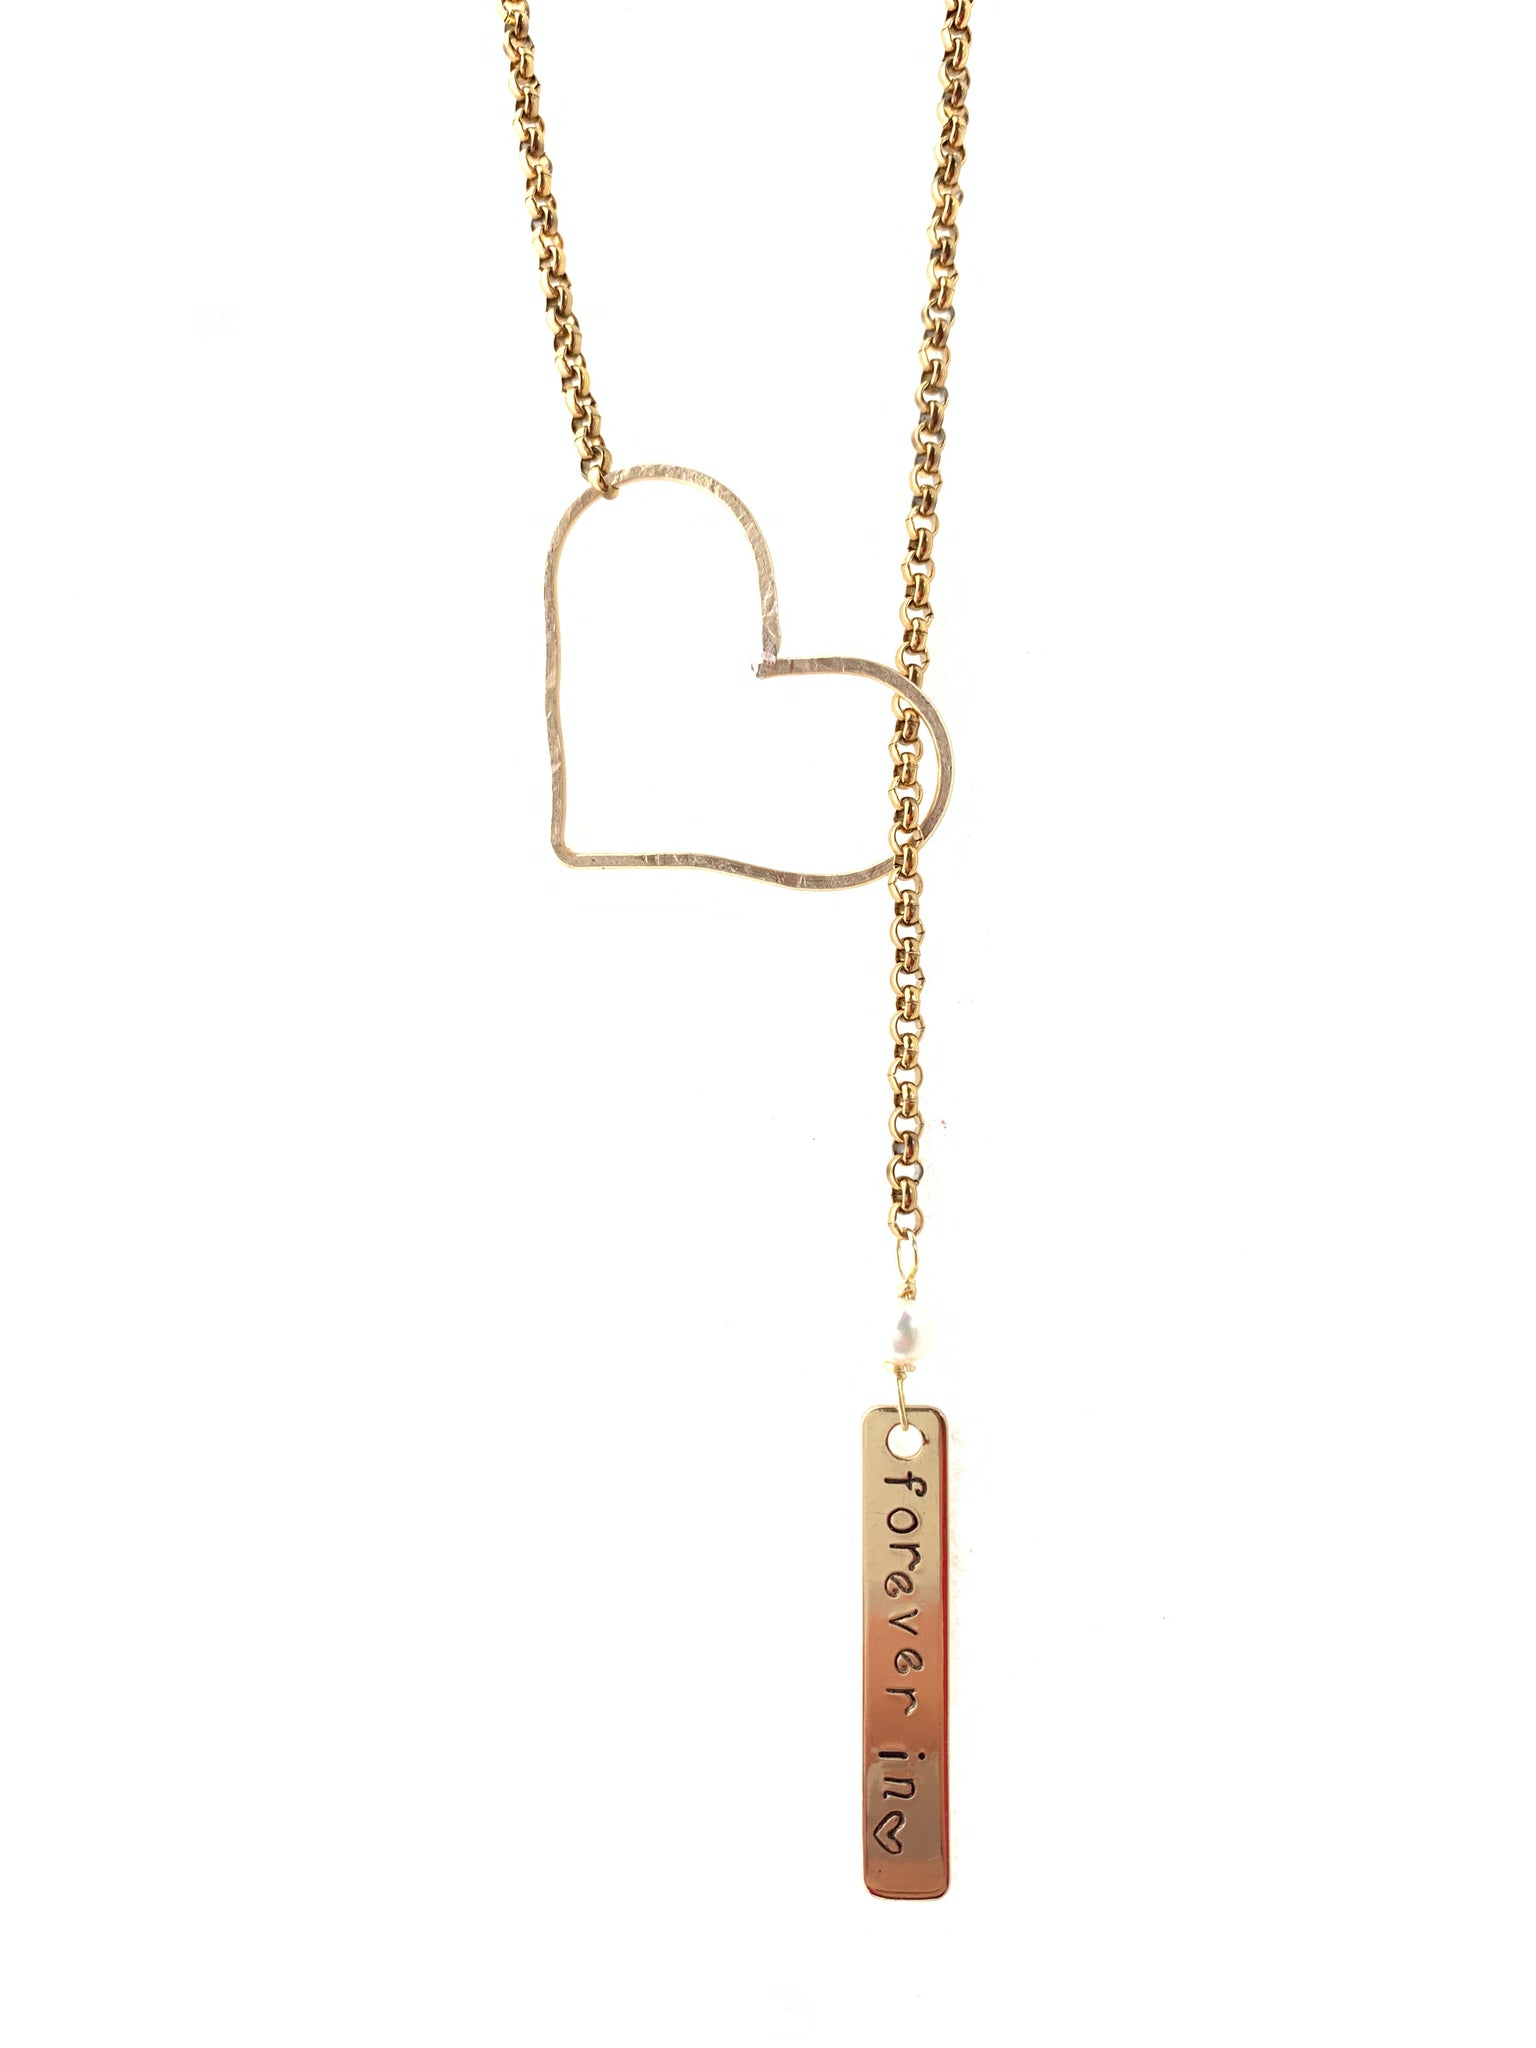 Handmade heart on gold plated chain forever in my heart necklace 